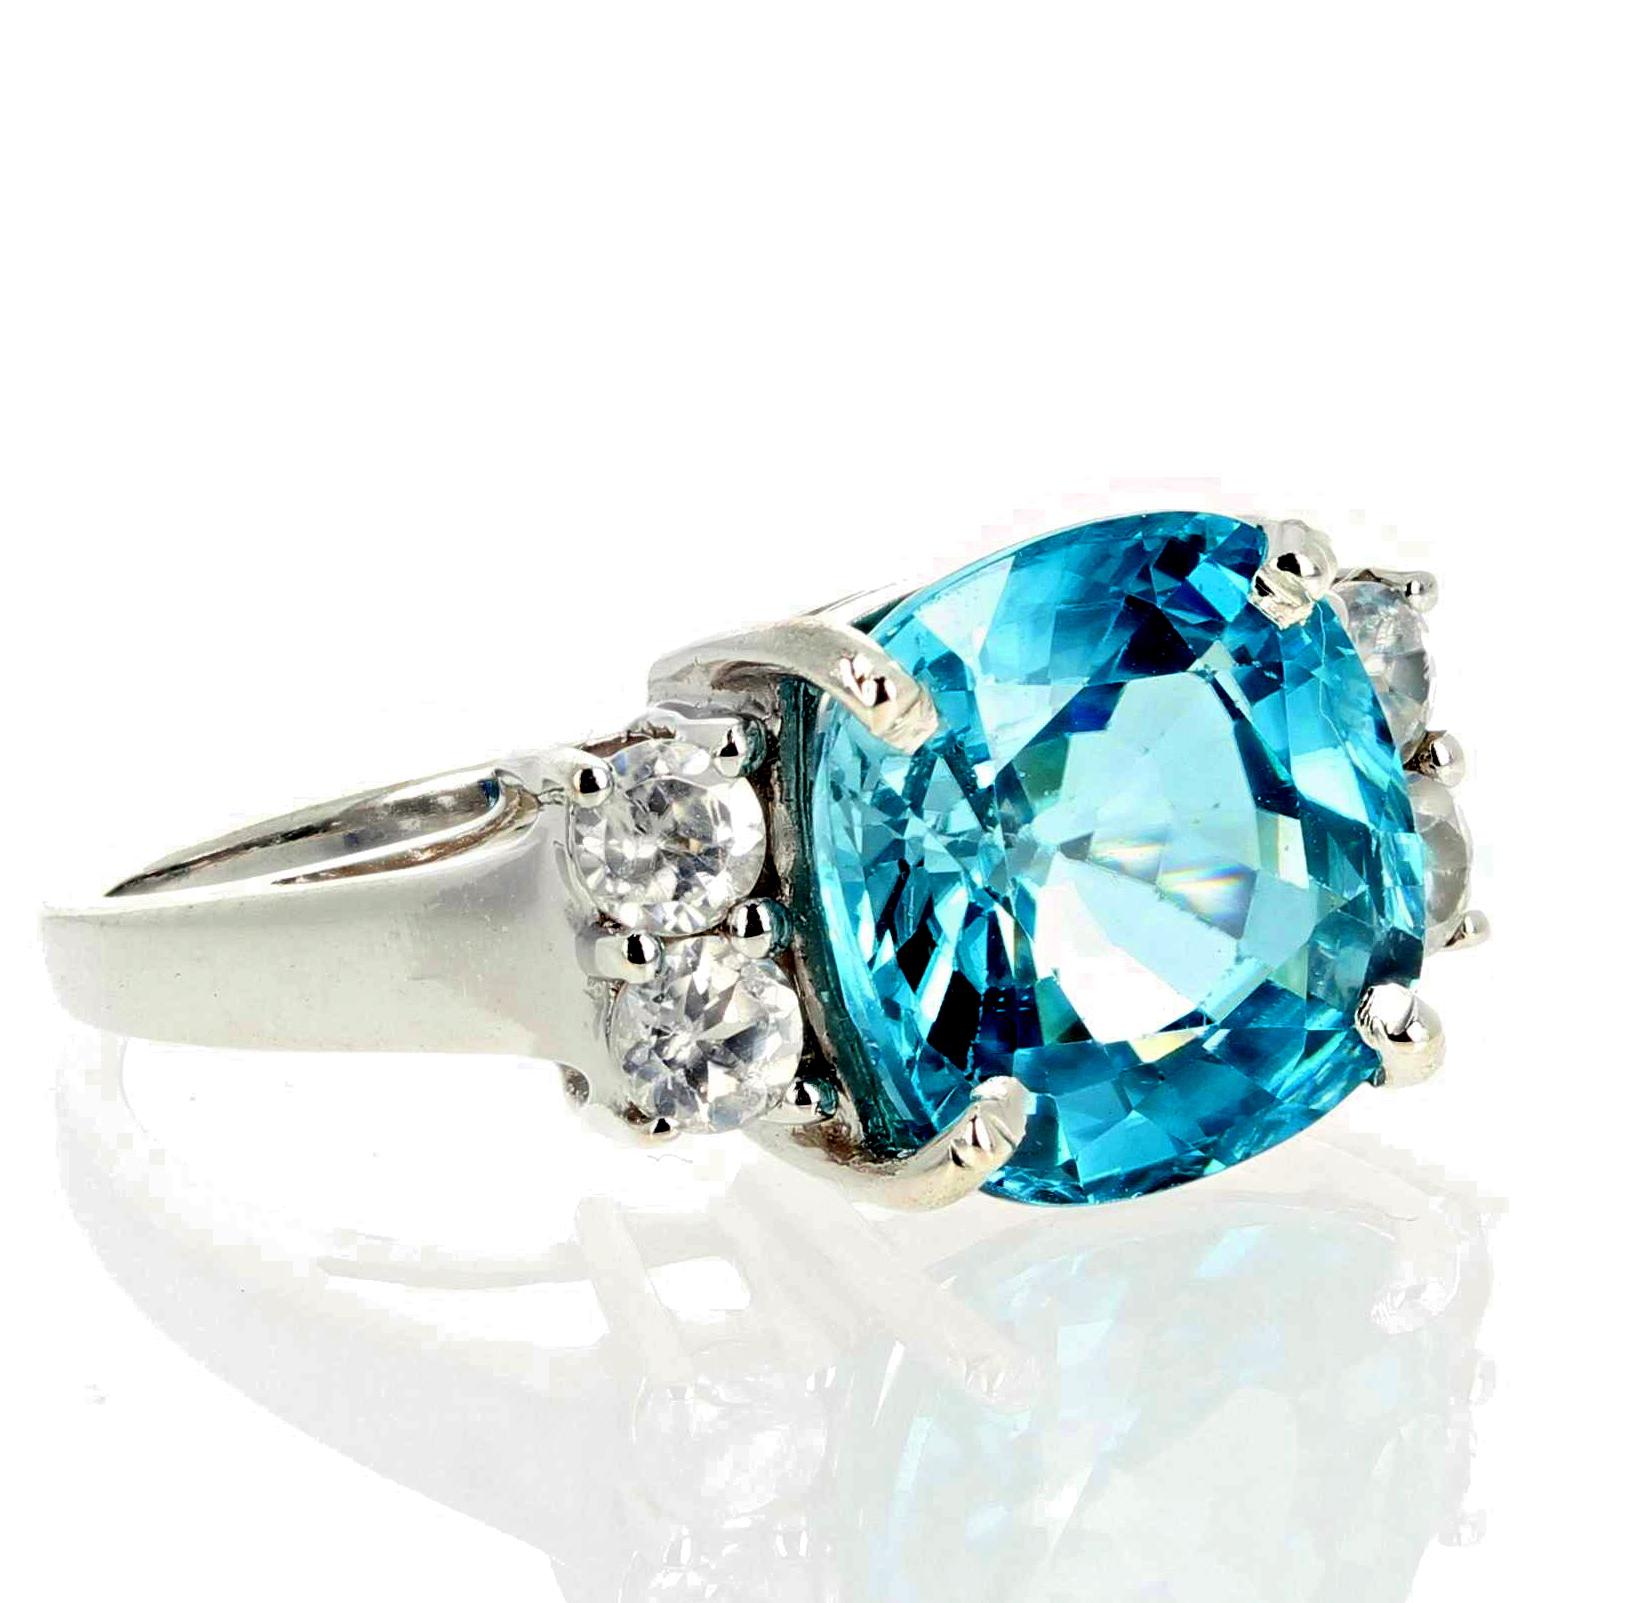 Glittering natural 6.82 carat cushion cut Blue Zircon (10.2mm x 10 mm) enhanced with smaller real white Diamonds set in a Rhodium plated sterling silver ring size 7 (sizable for free).  This is elegant for all occasions. 